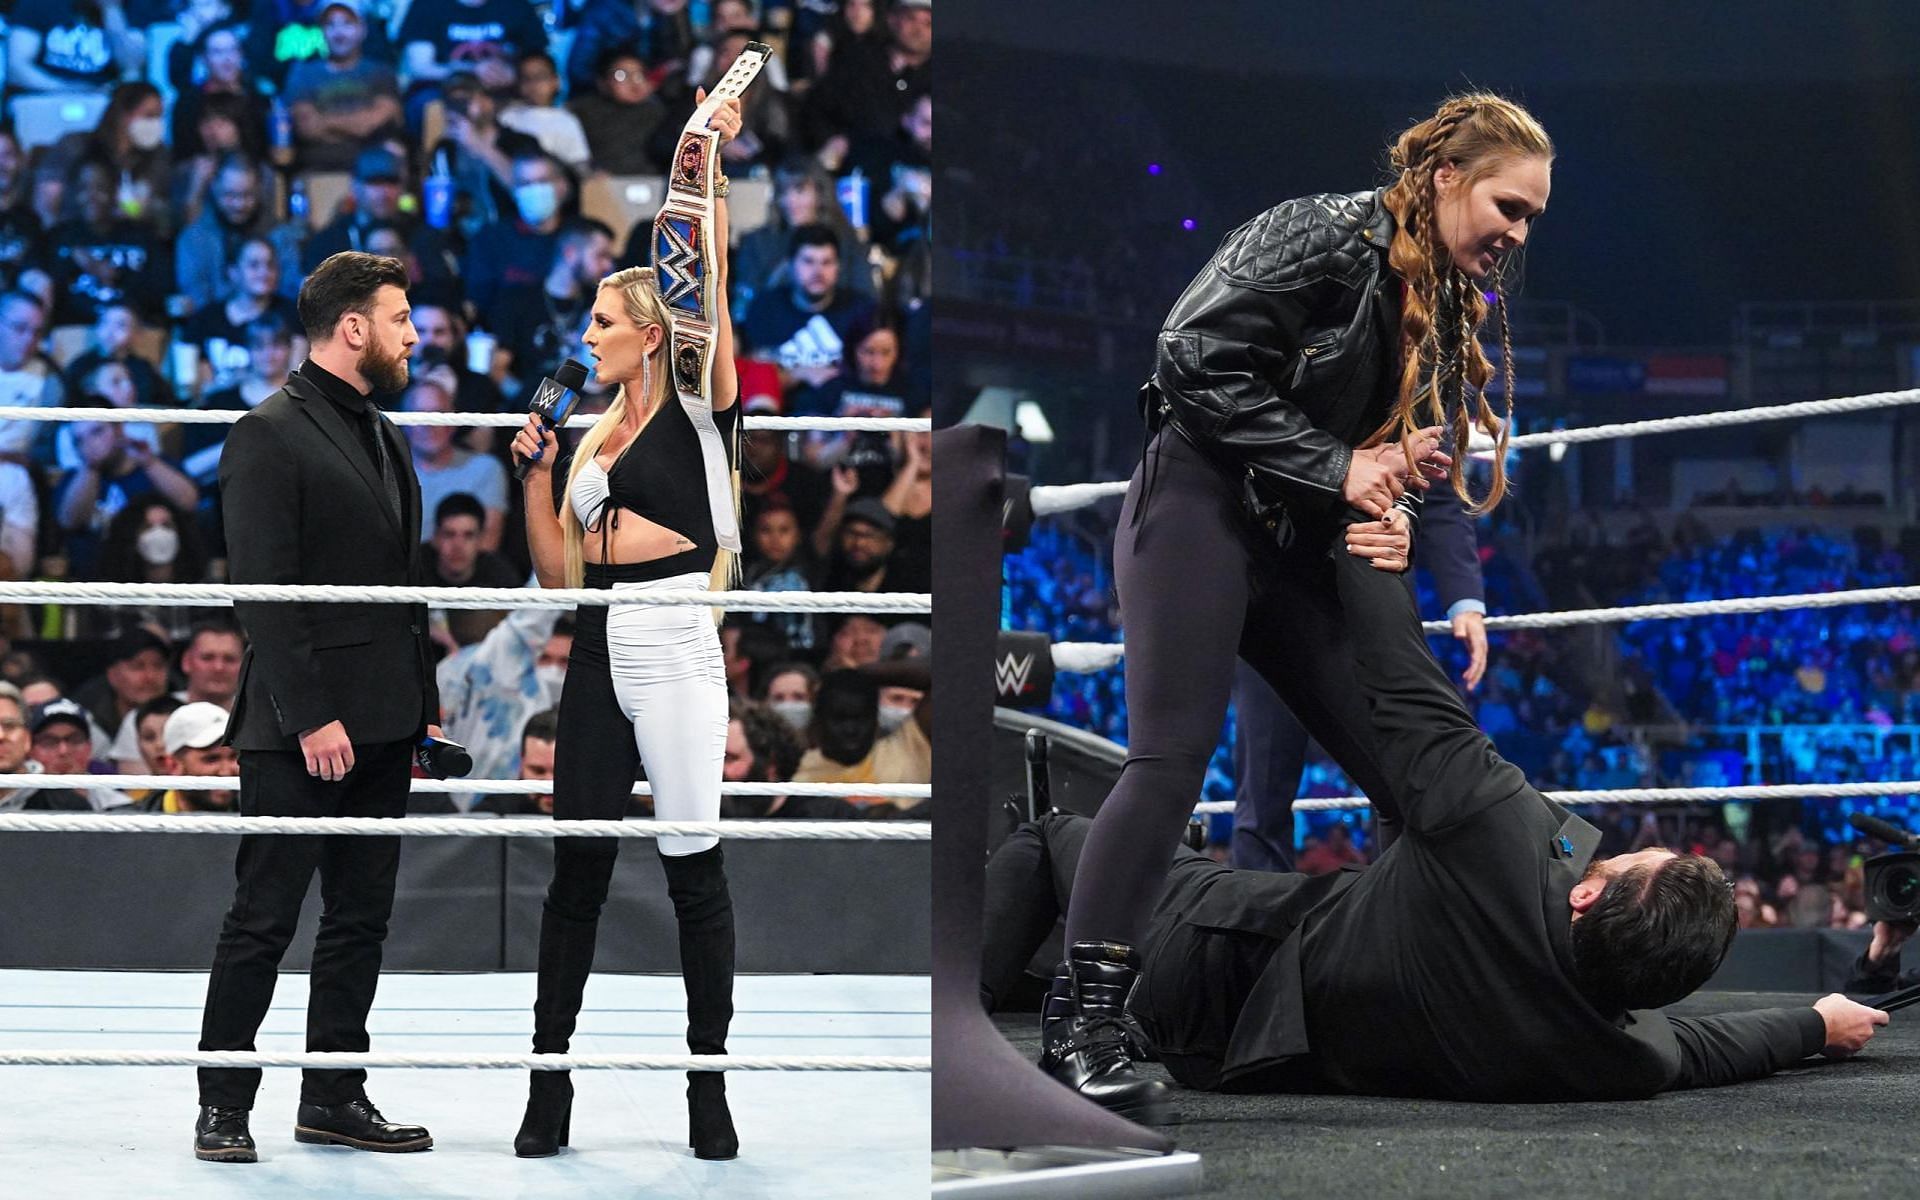 Ronda Rousey and Charlotte Flair will face each other at WrestleMania Backlash